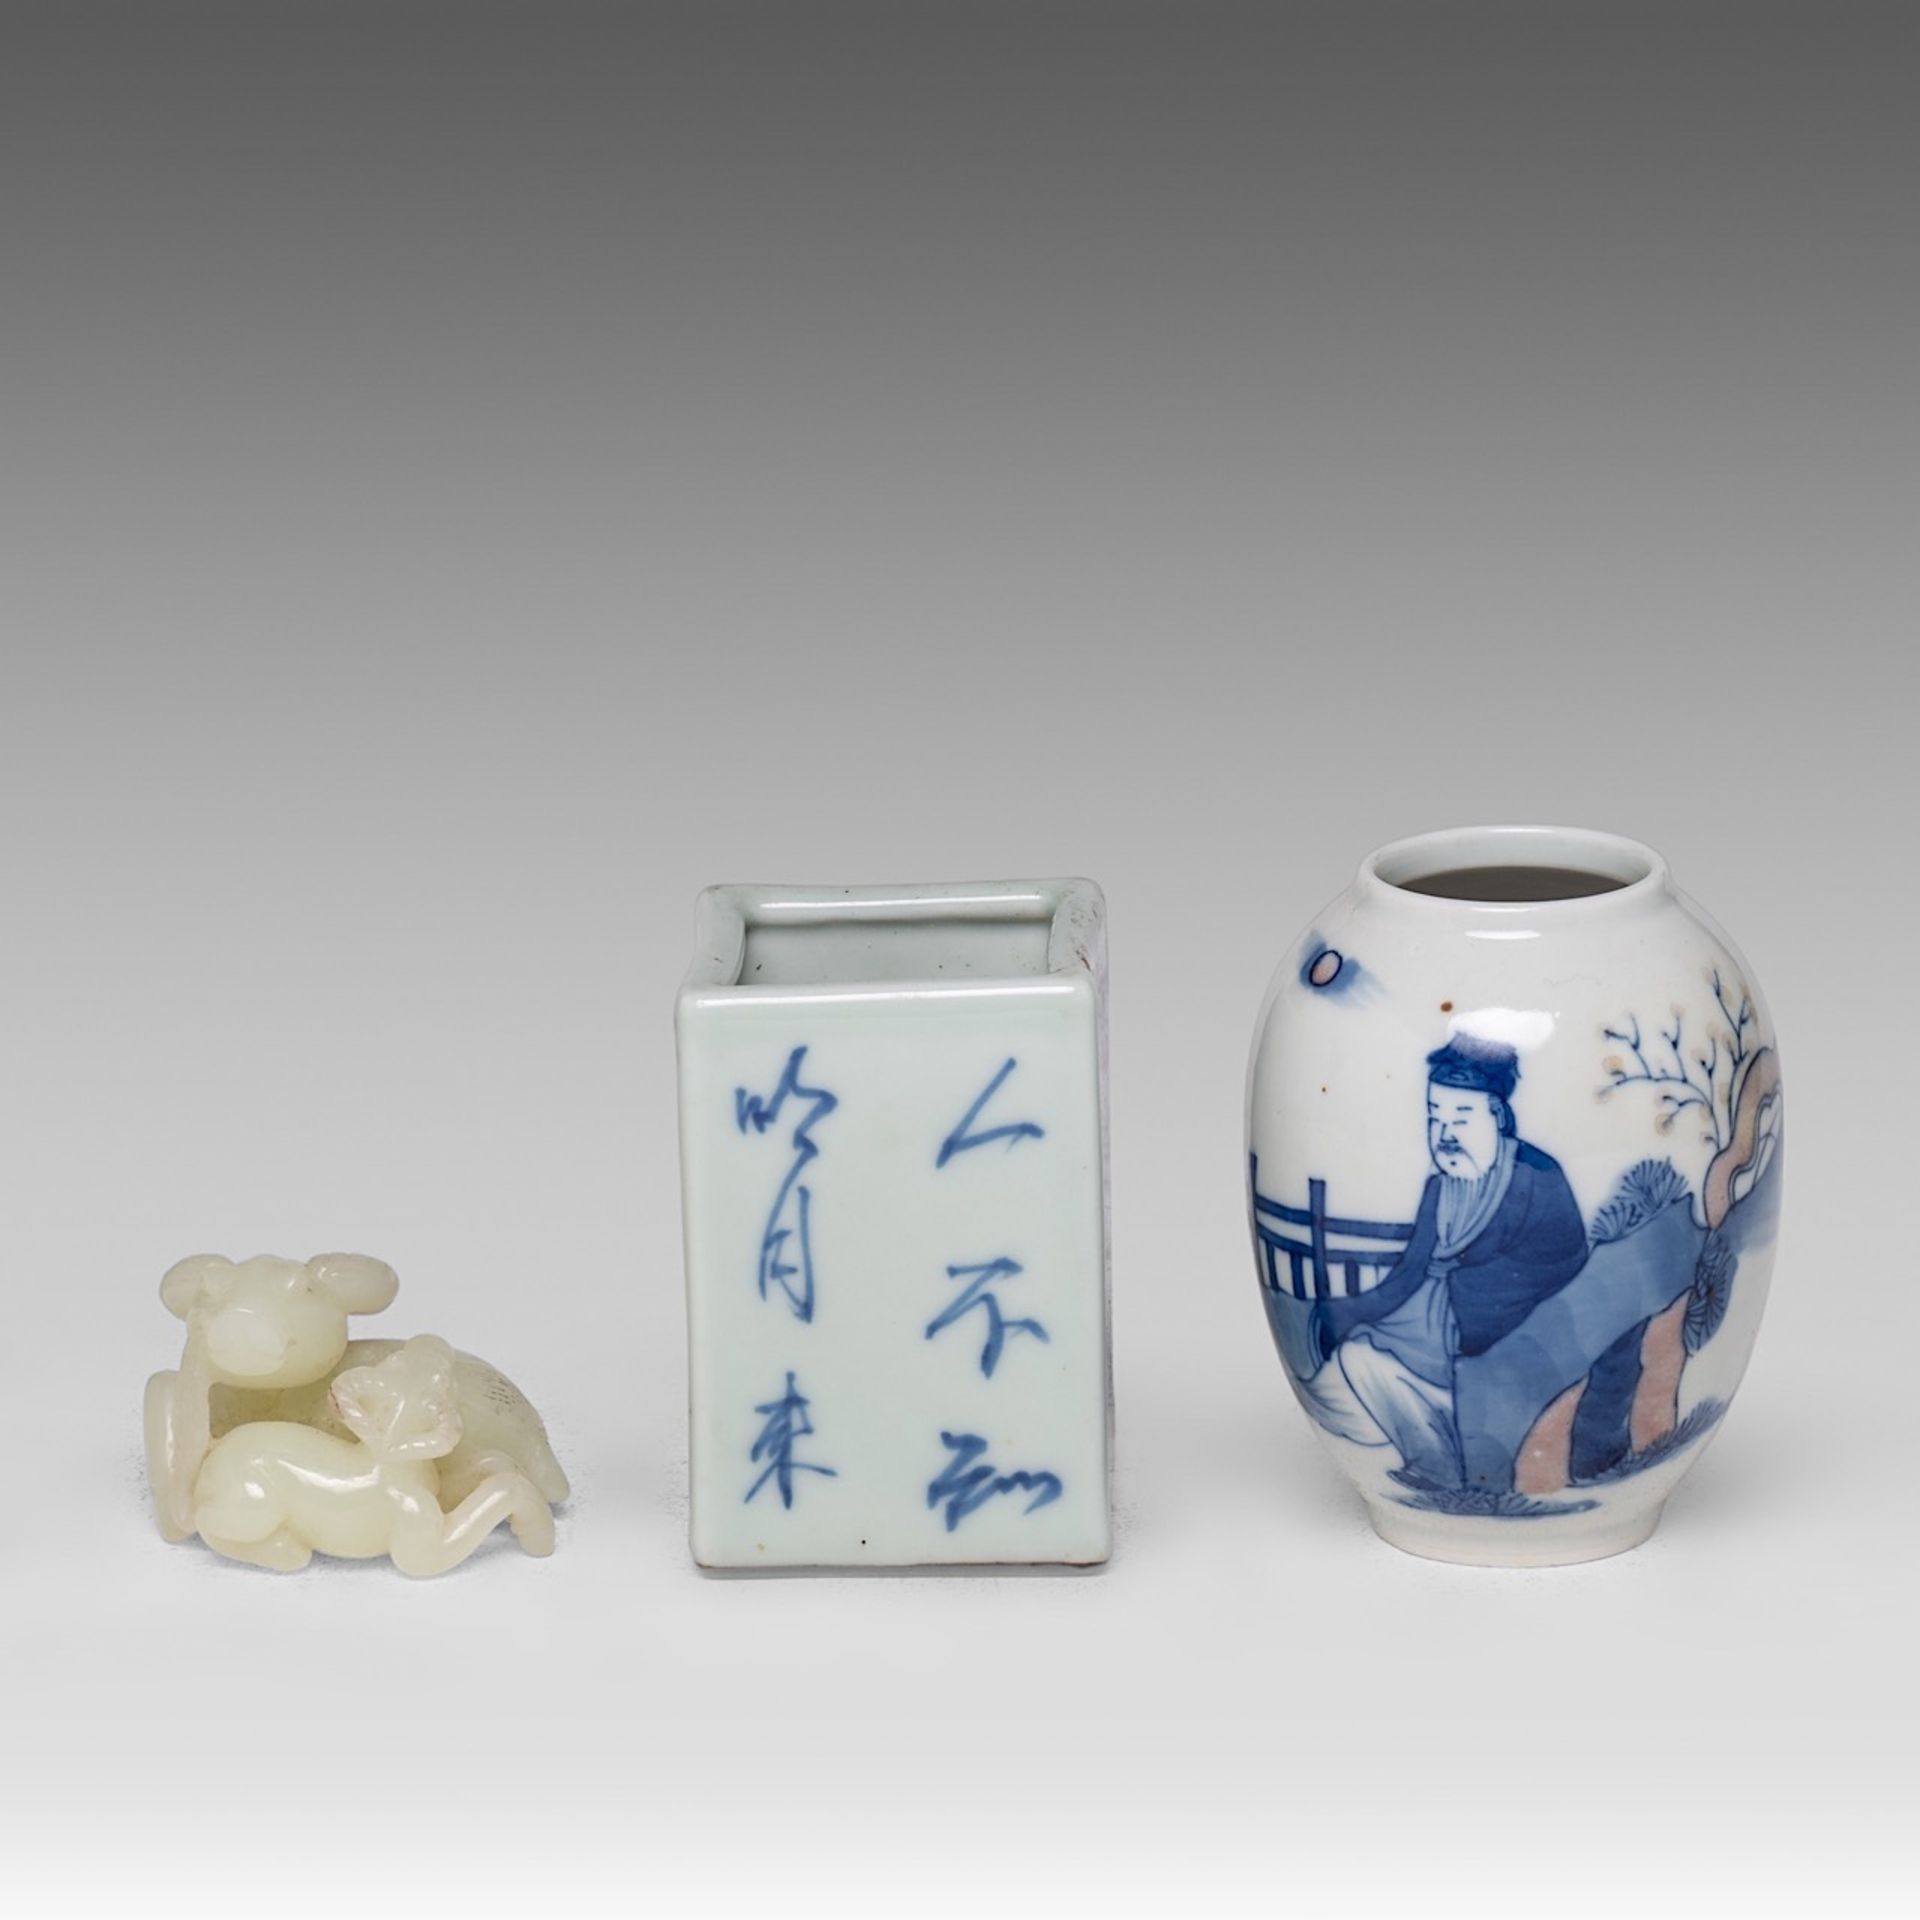 A collection of four Chinese scholar's objects, incl. a brush pot with inscriptions, late 18thC - ad - Image 2 of 29